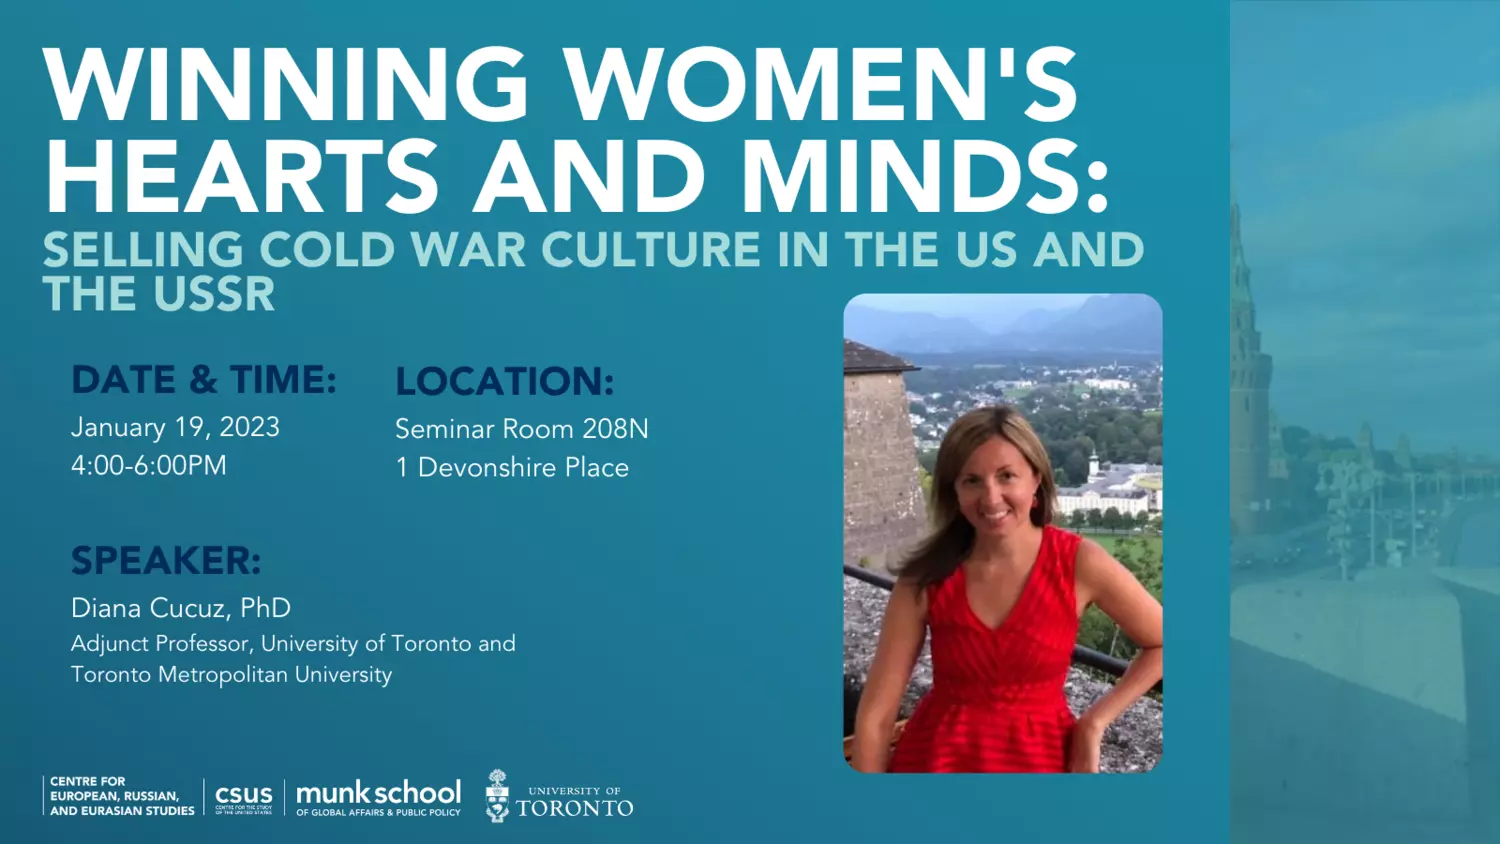 Winning Women's Hearts and Minds event details with photo of Diana Cucuz